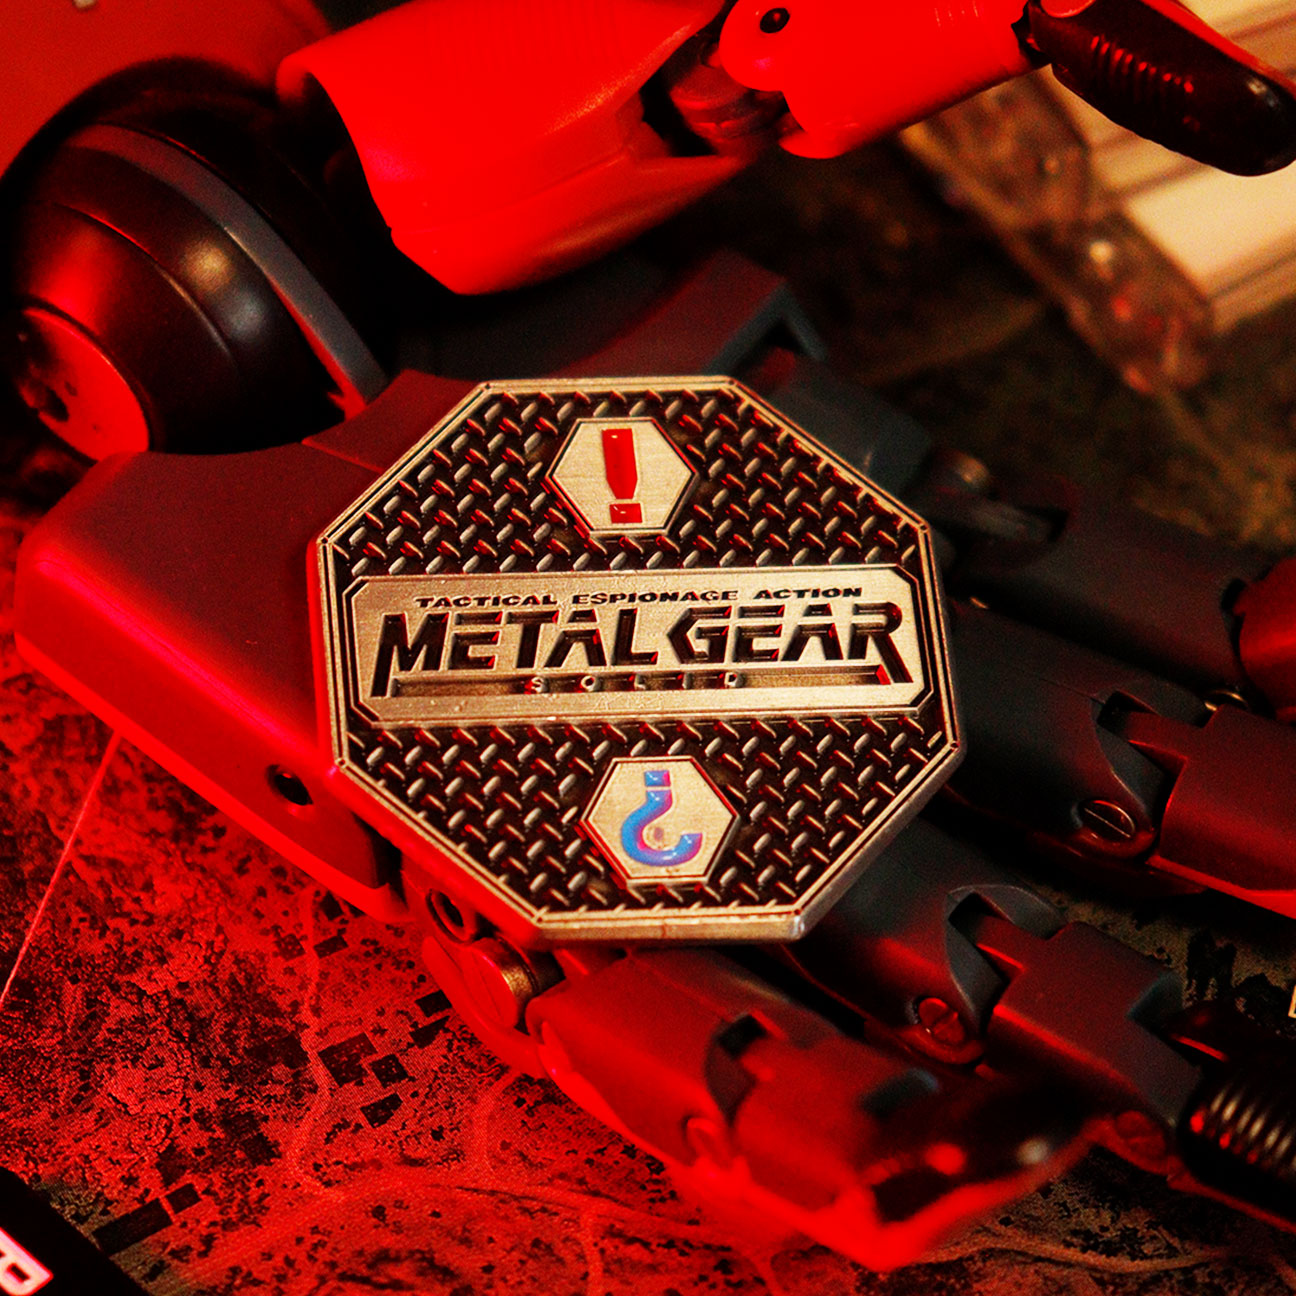 Metal Gear Solid Limited Edition 'Solid Snake' Collectible Coin